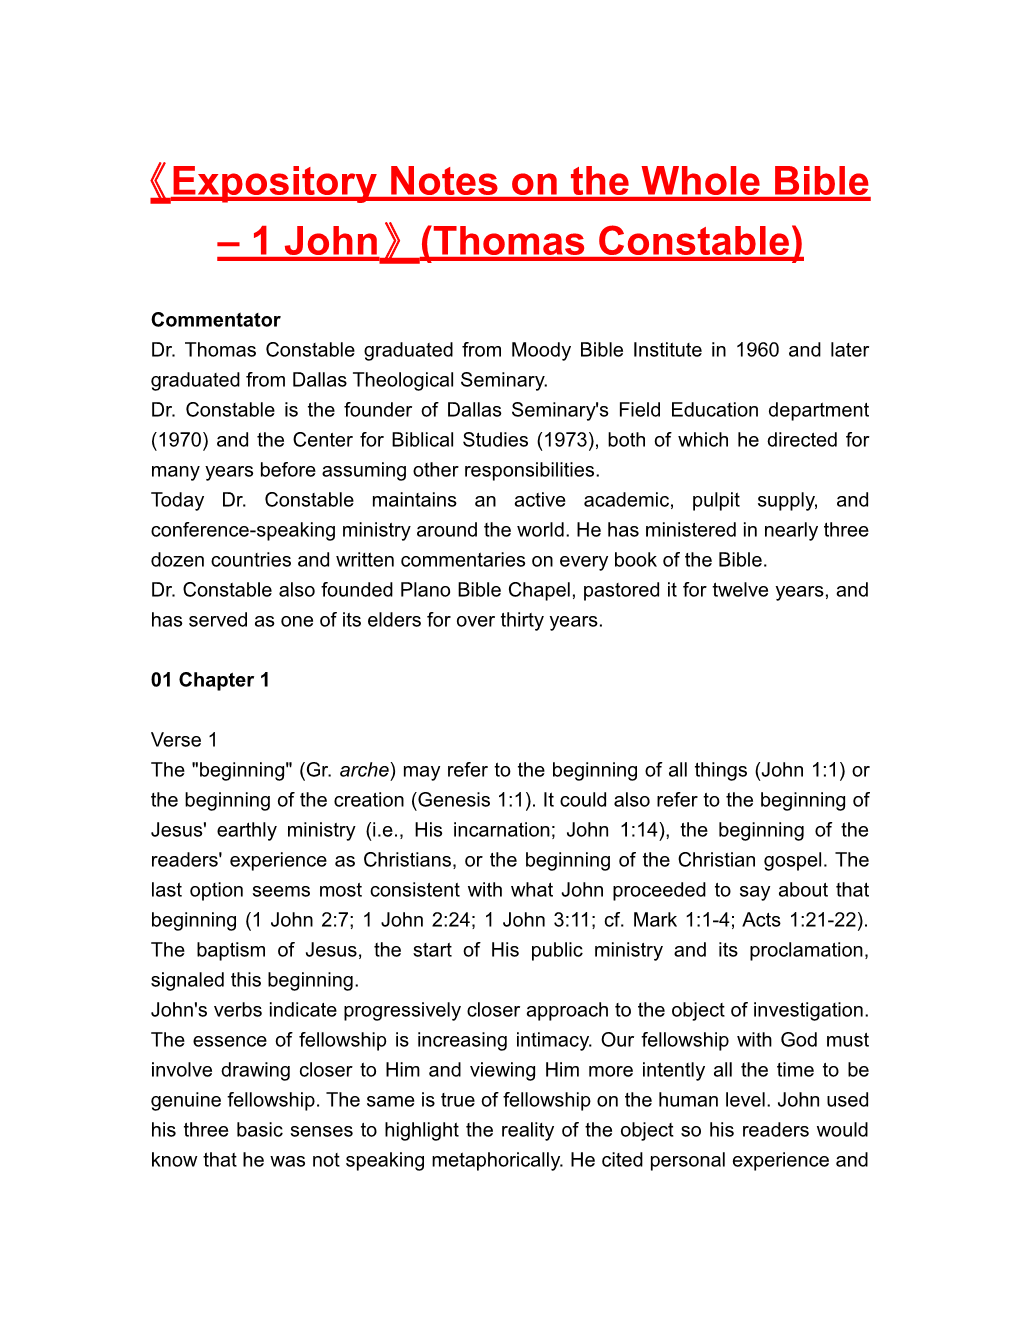 Expositorynotes on the Wholebible 1 John (Thomas Constable)